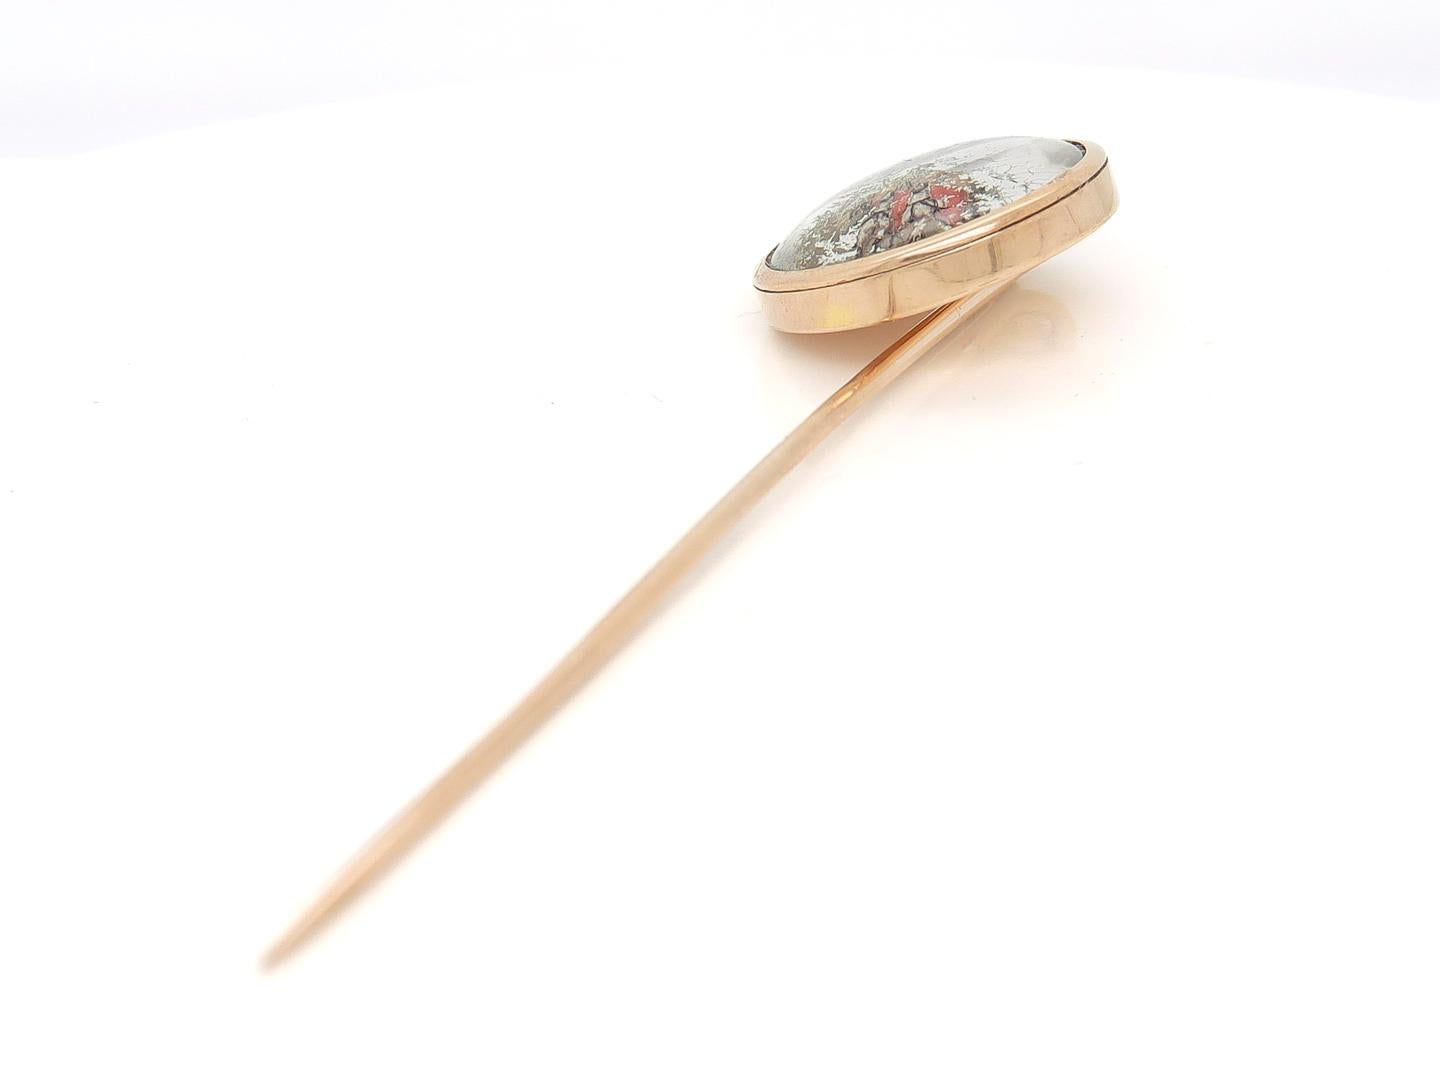 Large Antique Signed 14k Gold Essex Crystal Stickpin of a Stagecoach or Carriage For Sale 5